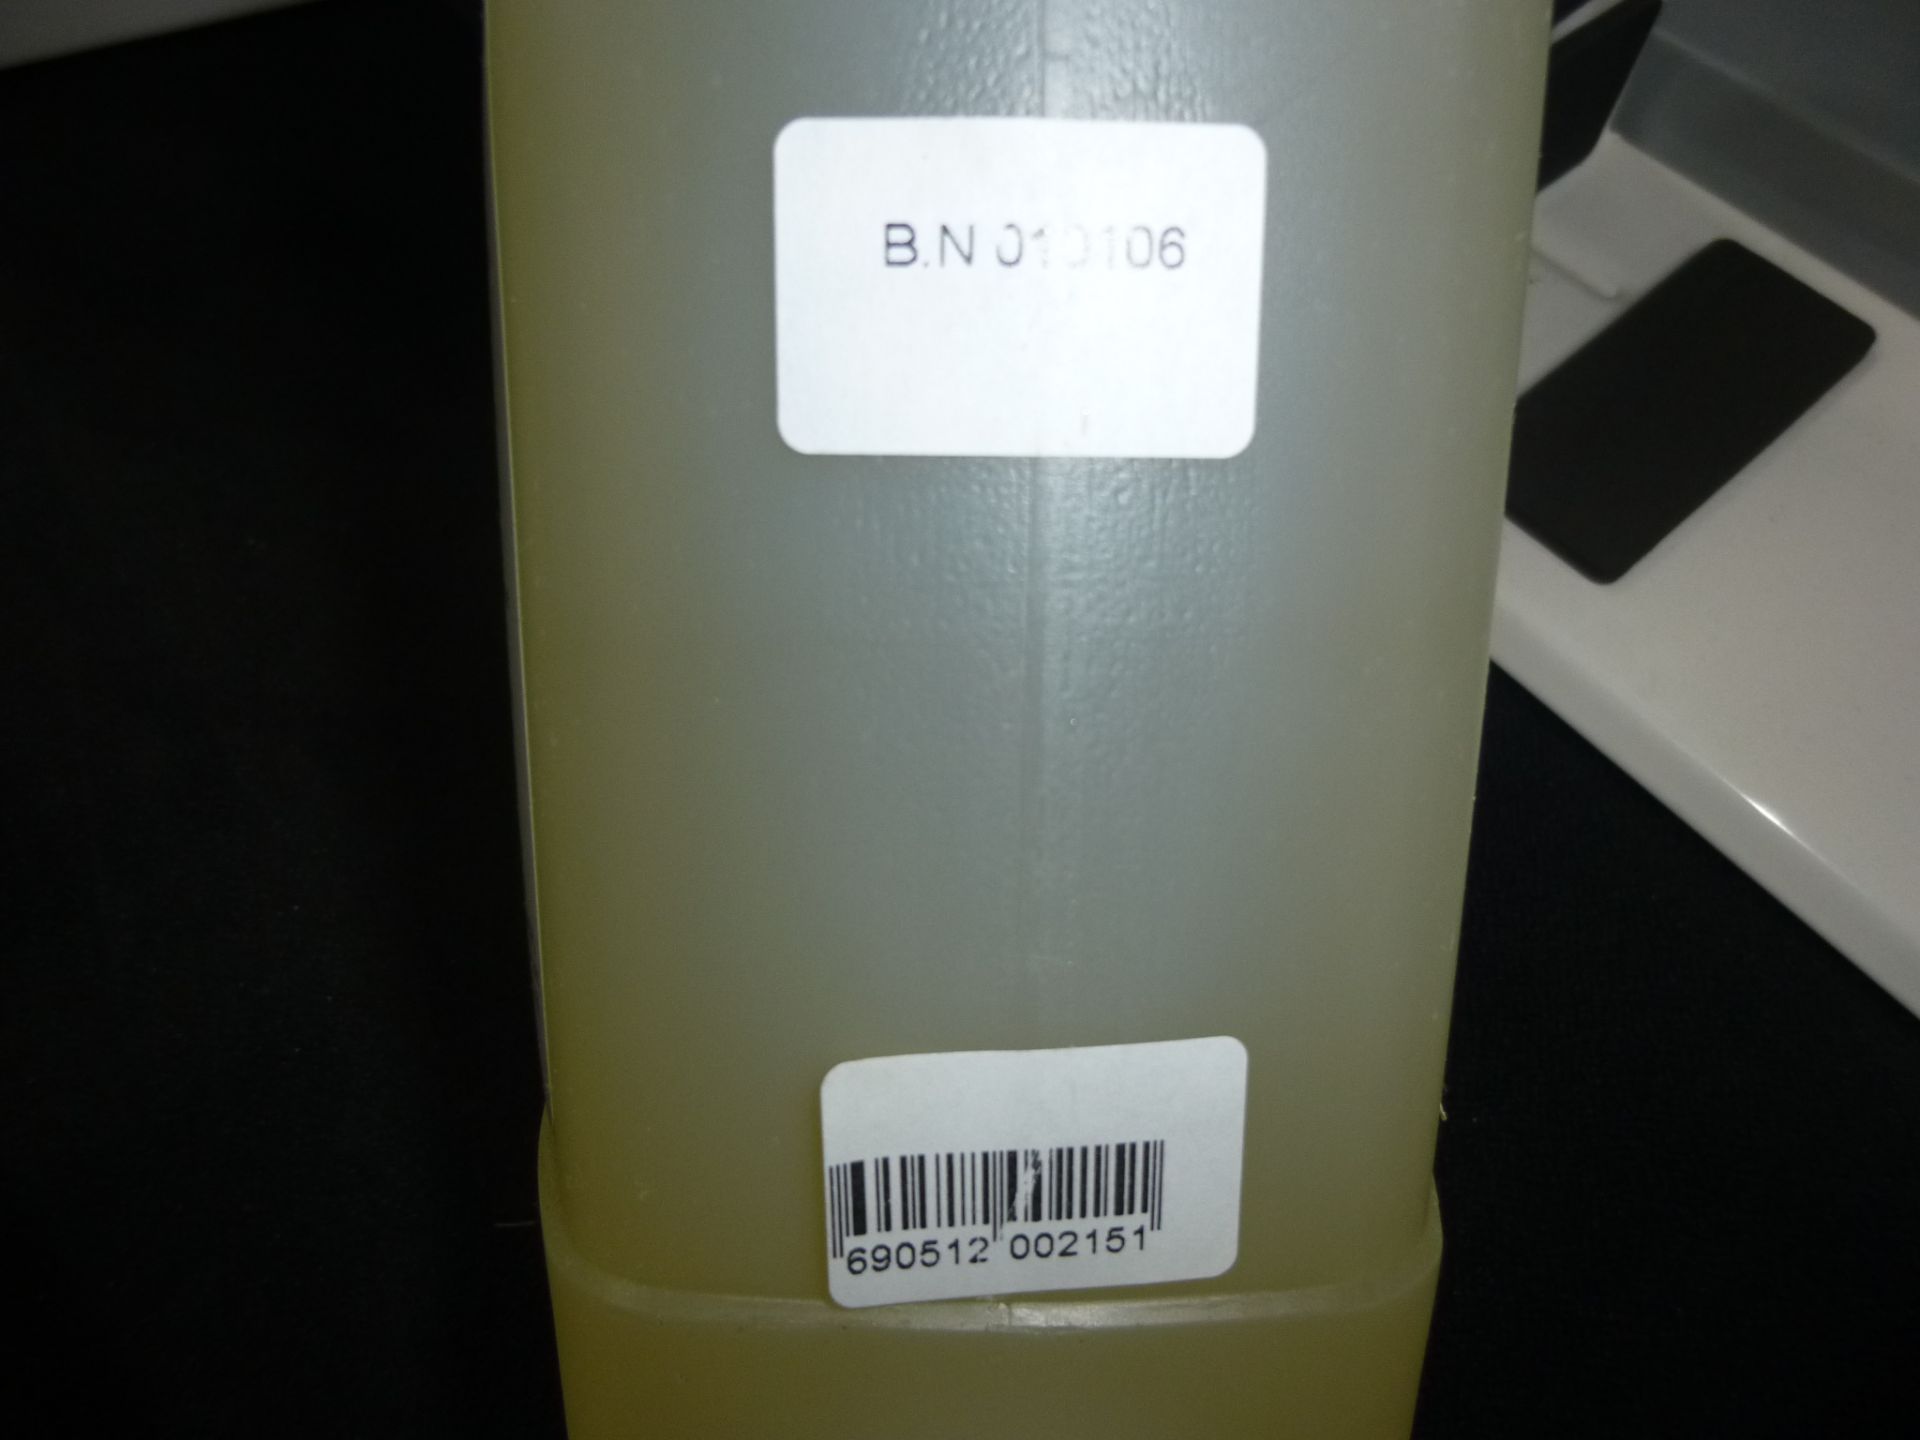 80 x 2L Spa 26 Sanitiser for hands, feet & Nails from the Dead Sea - Image 6 of 6